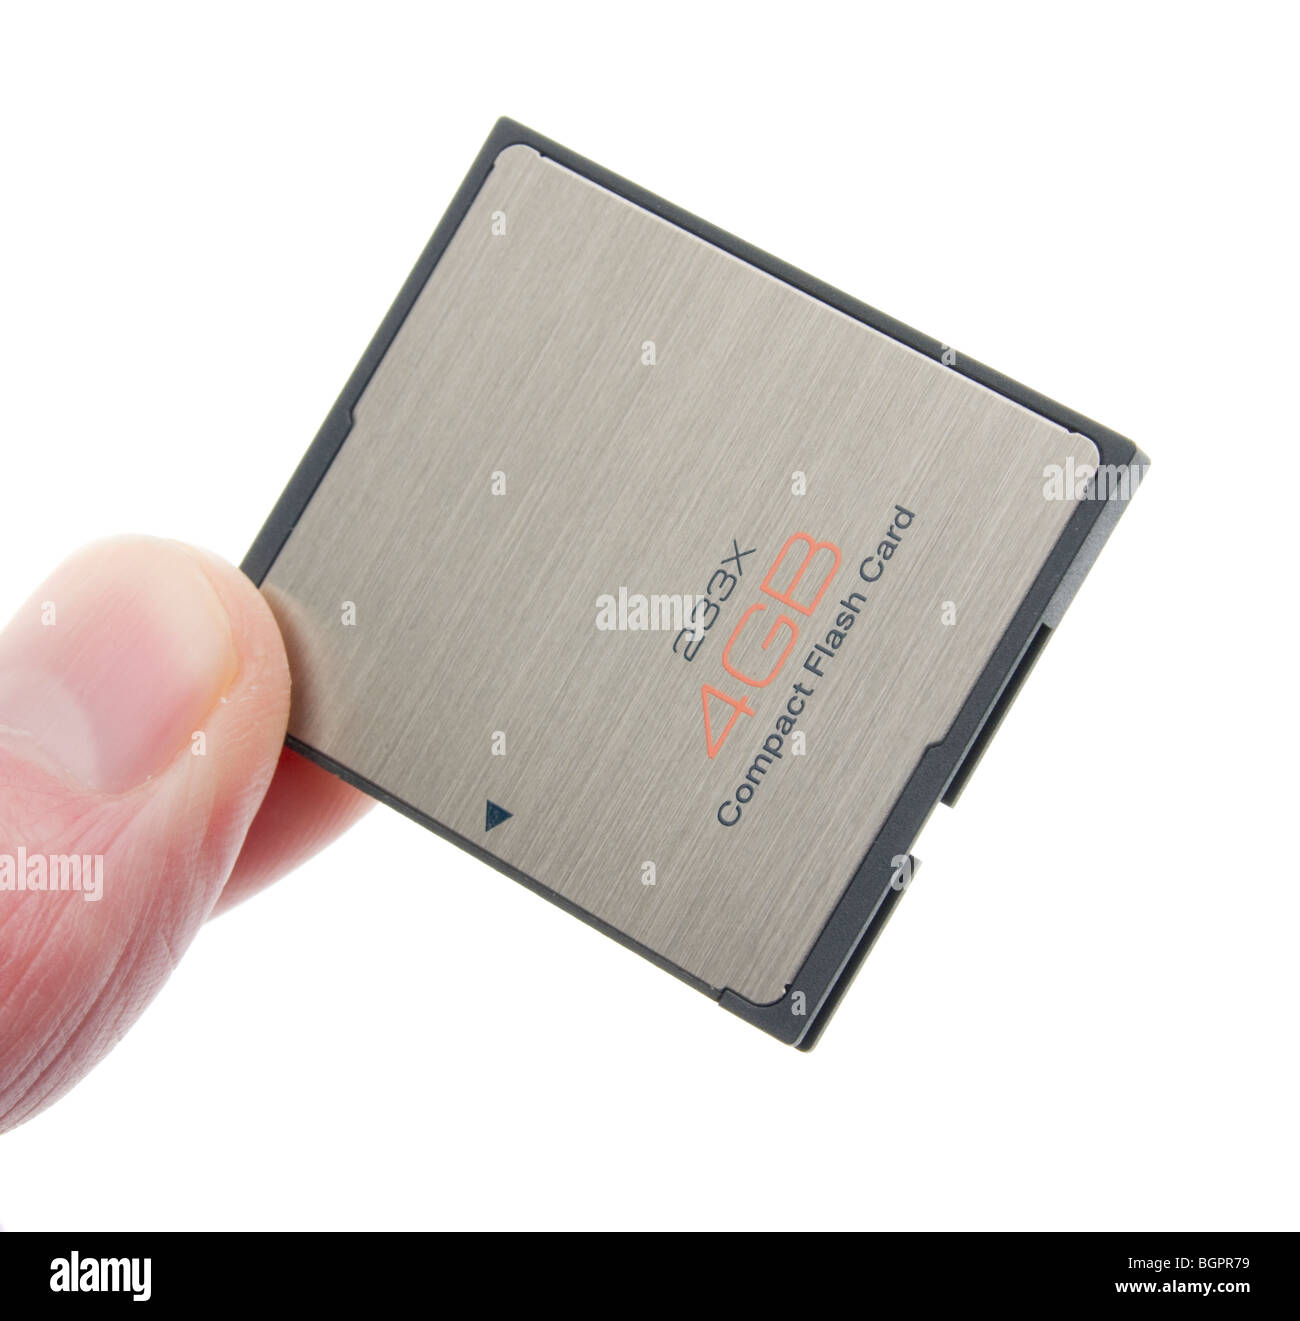 CompactFlash memory card 4GB 233X shock and magnet proof 2010 design - Samsung branding removed by retouching - anonymous Stock Photo